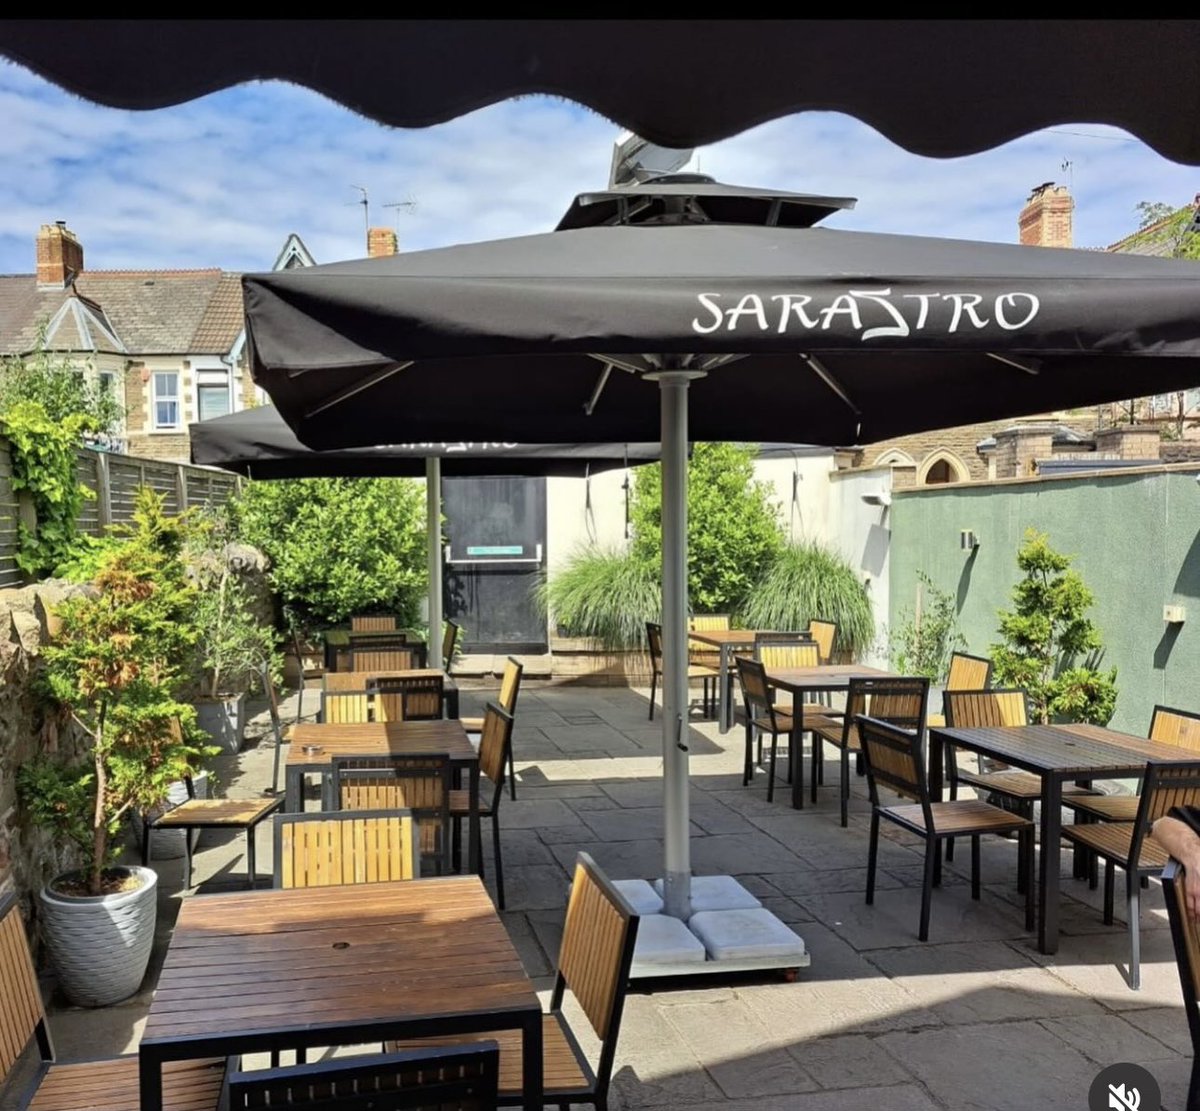 Sunshine and sunshine are the best places to be in Saraztro Garden 🍷🍷🍷#Roath #Wellfieldroad #Cardiff